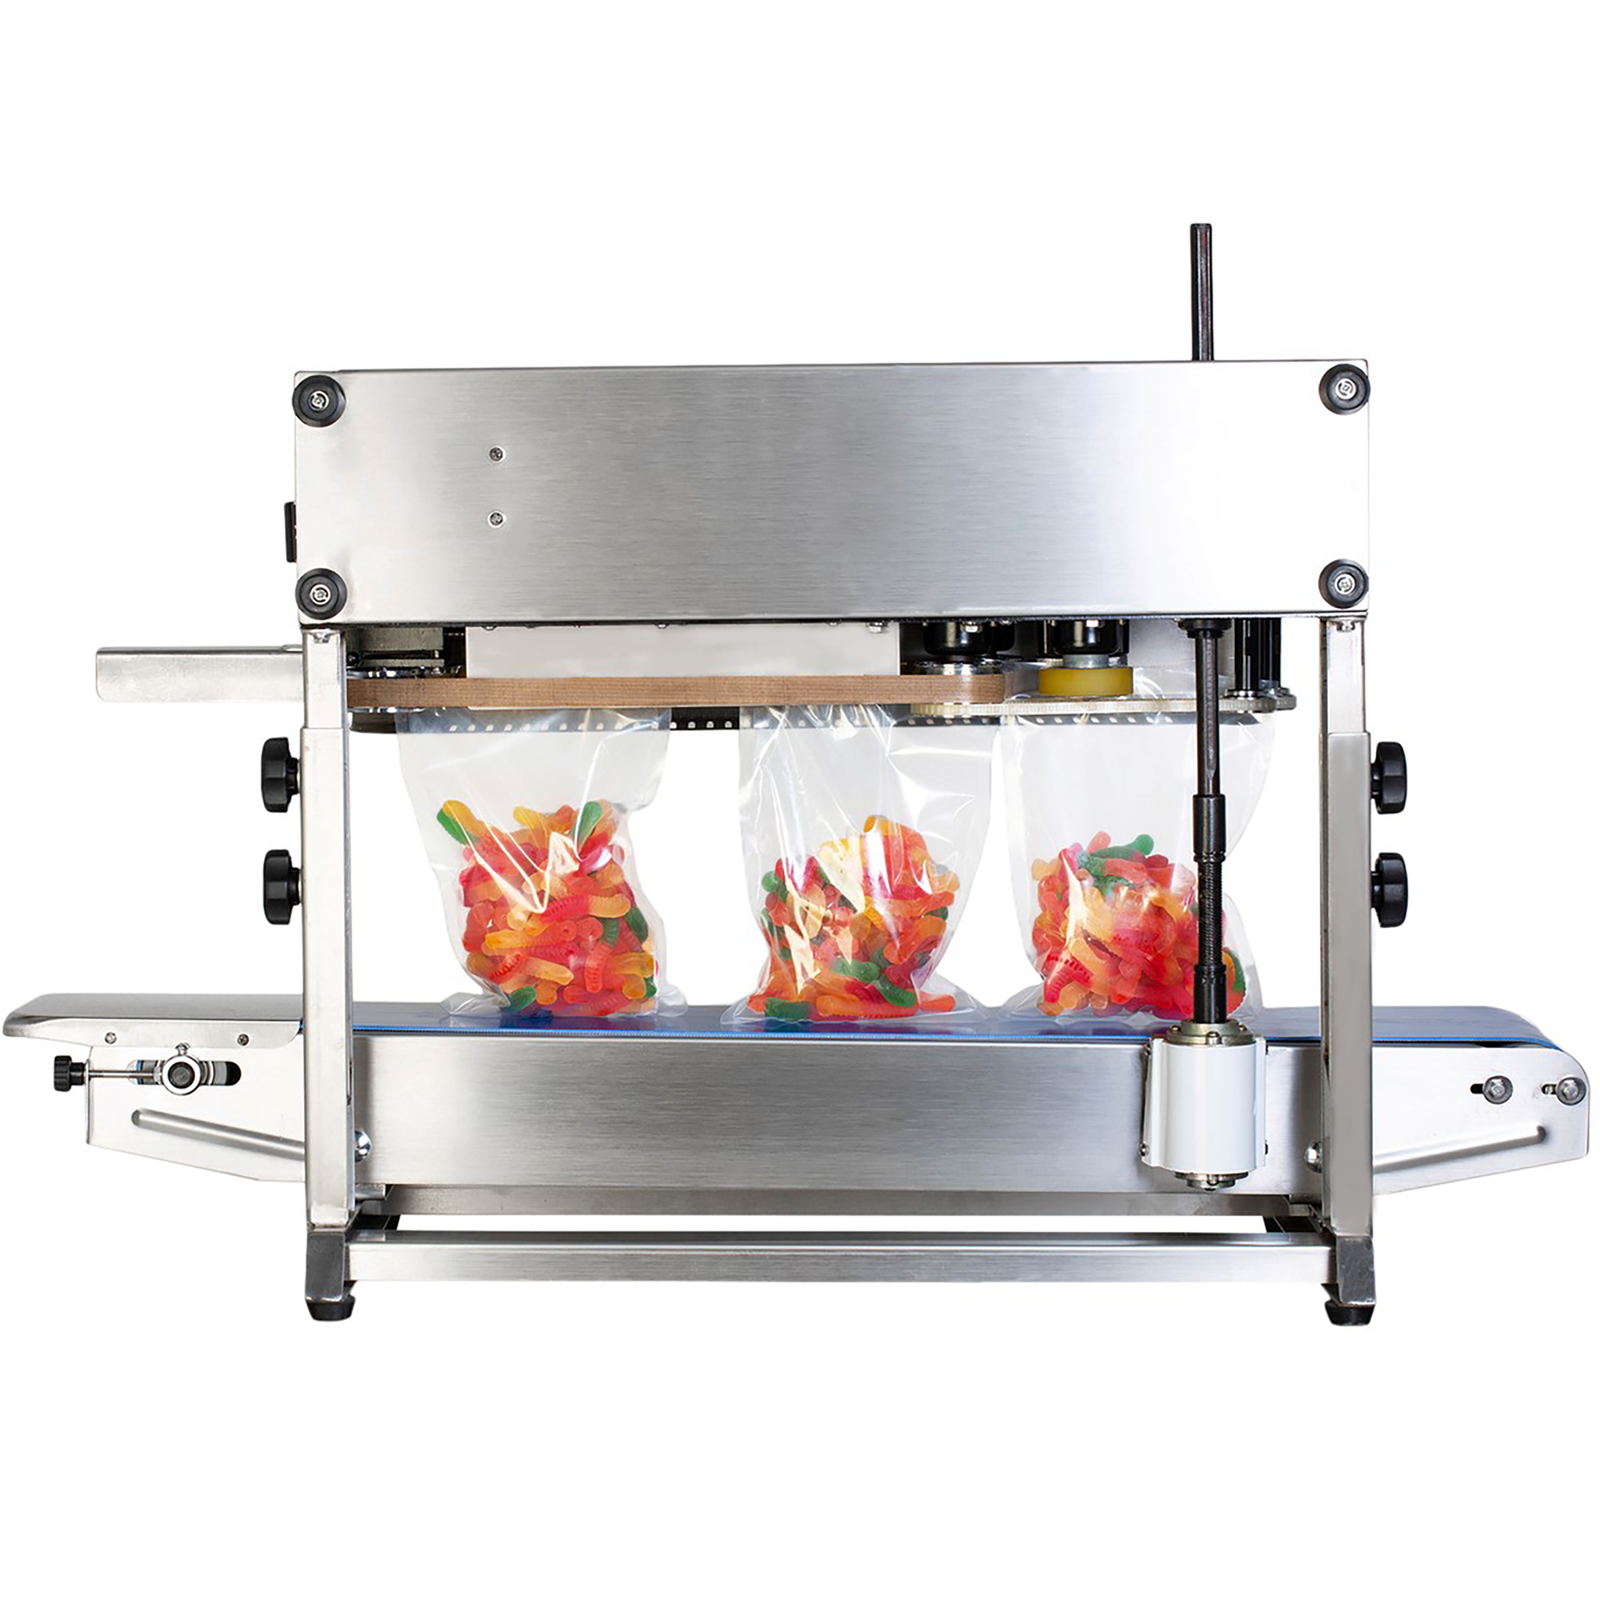 back view of the JORESTECH stainless steel continuous band sealing machine while it is sealing clear plastic bags filler with colored gummy worms. Machine is set for vertical applications..